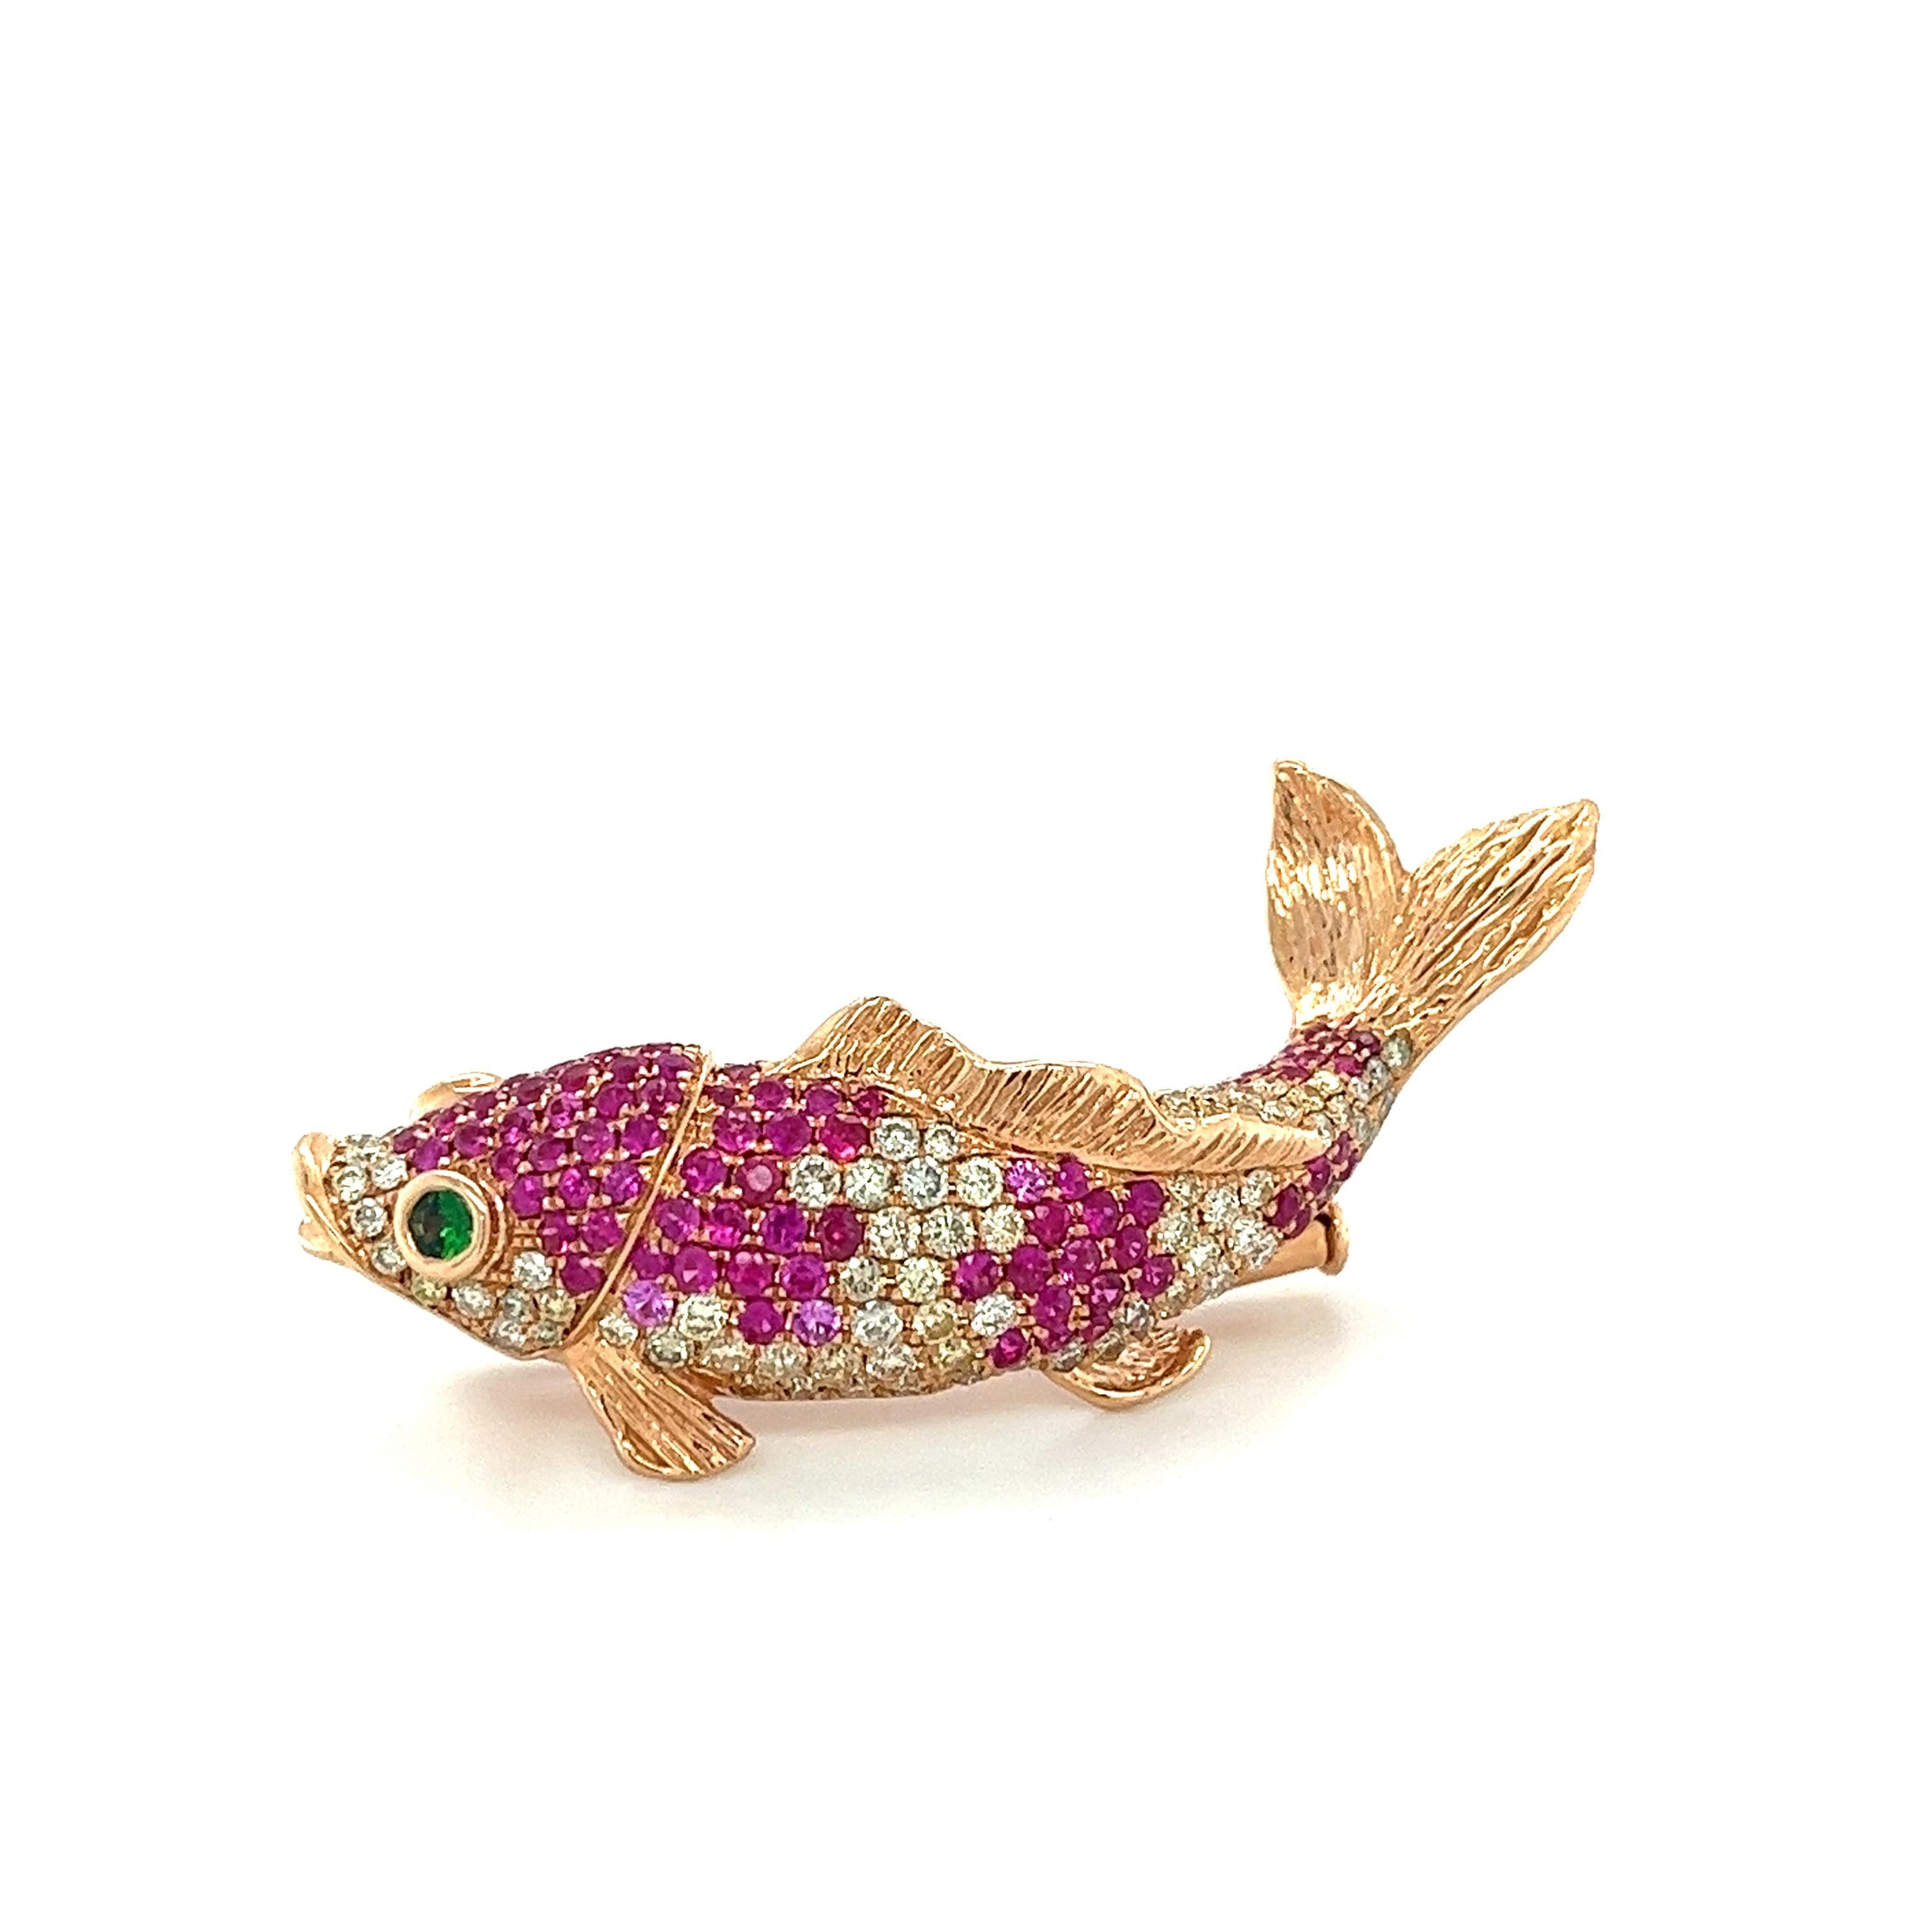 Fancy Diamond & Ruby Fish 18K Rose Gold Brooch

15 Fancy Diamonds 1.53 CT
2 Green Garnet 0.14 CT
6 Pink Sapphires 0.11 CT
105 Rubies 1.56 CT
18K Rose Gold 11.72 GM

The Ruby gemstone is one of the four main precious gemstones. It is a red stone that